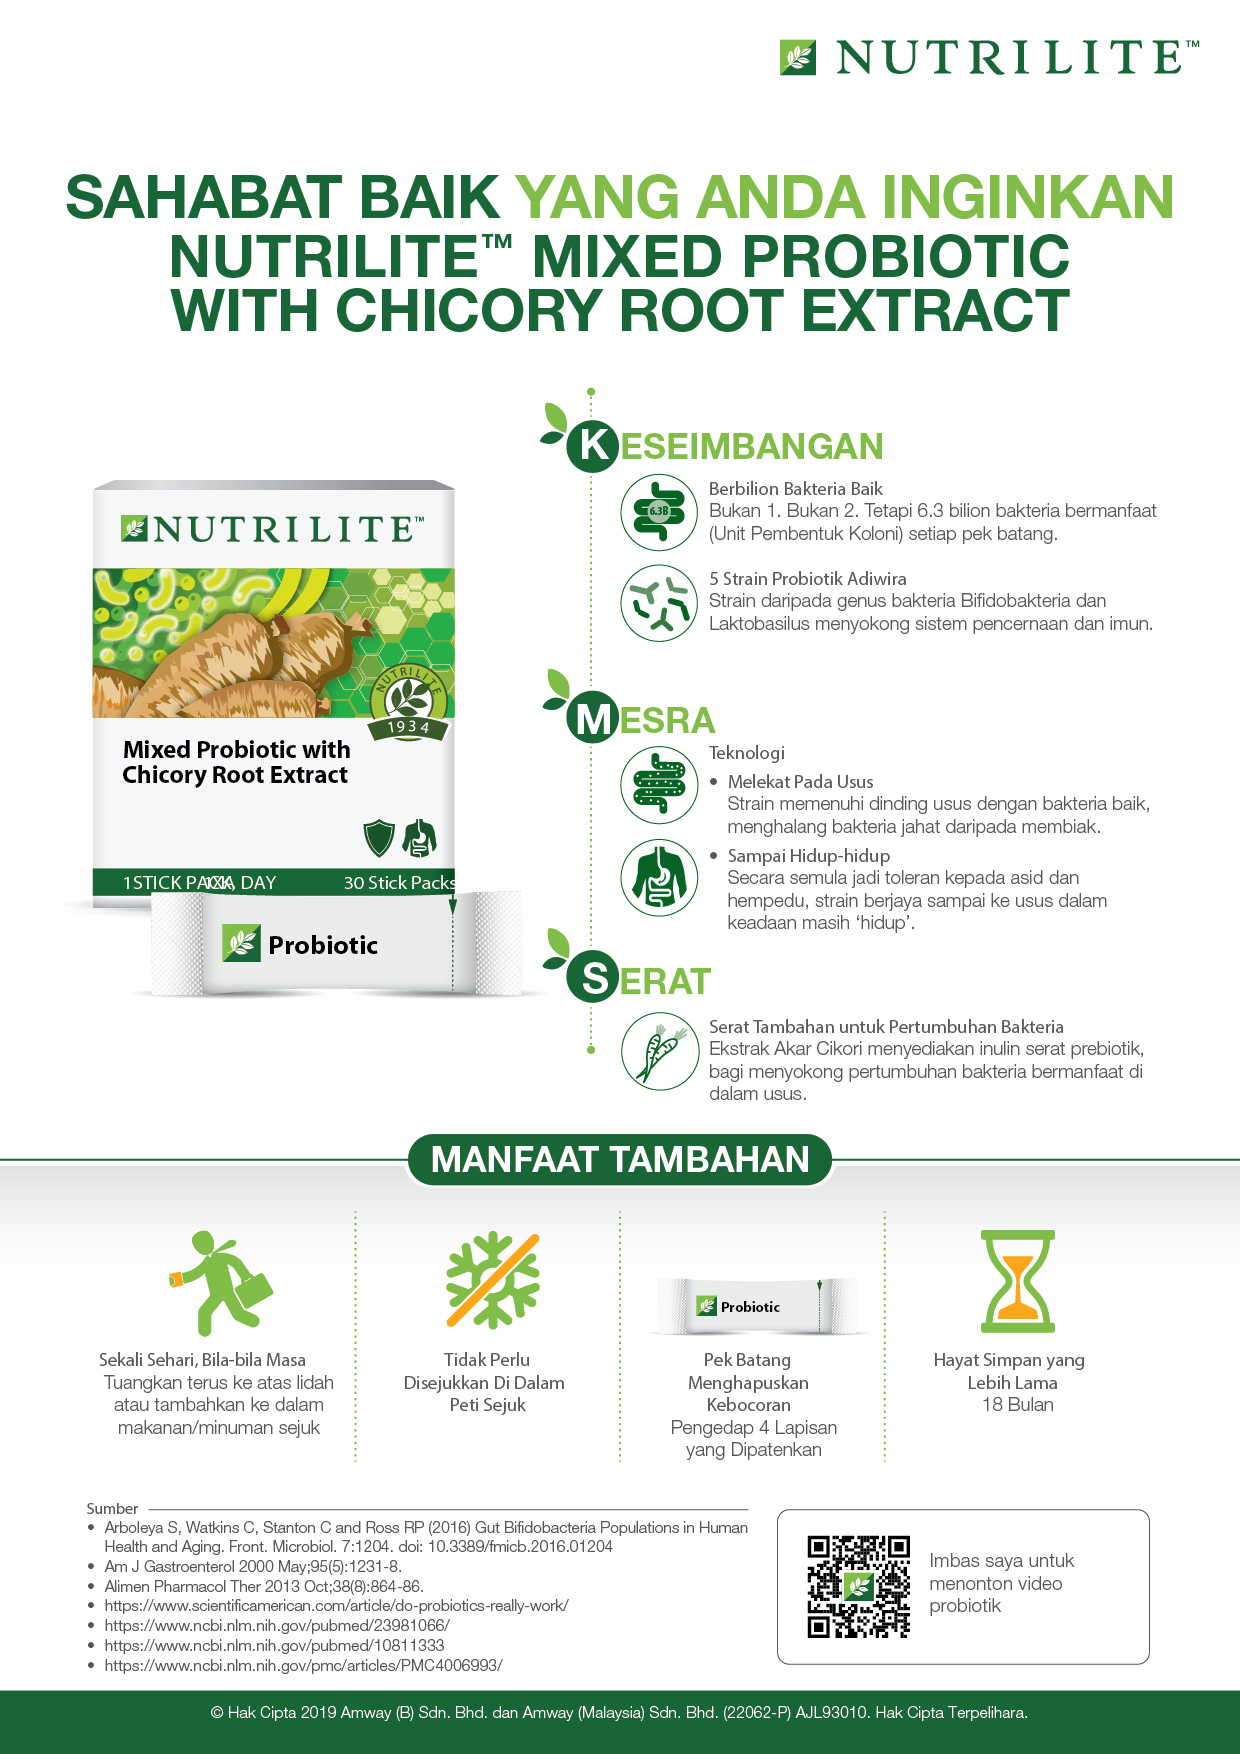 NUTRILITE MIXED PROBIOTIC WITH CHICORY ROOT EXTRACT